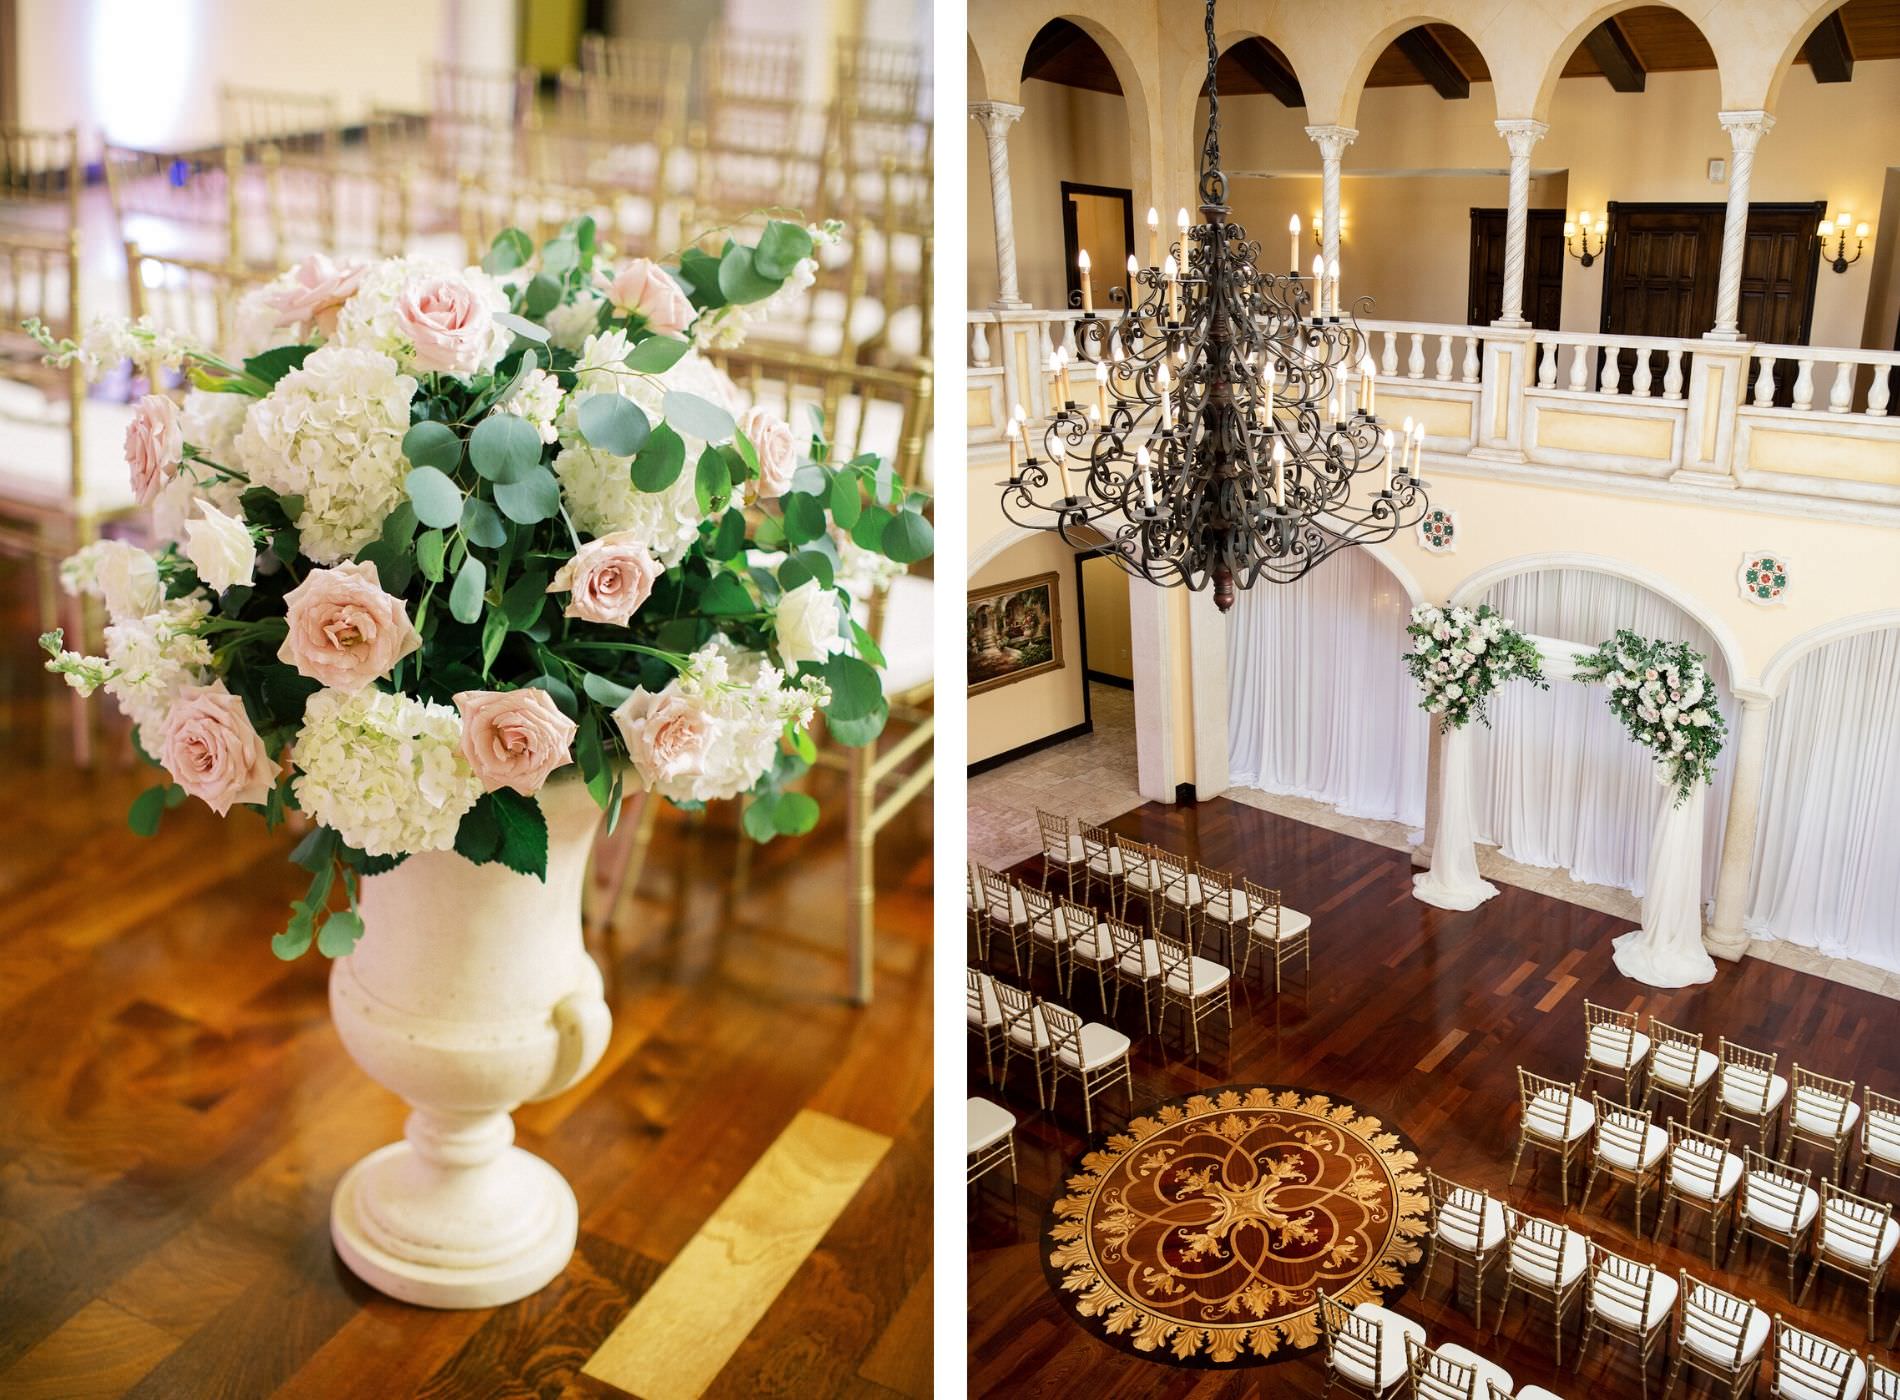 Wedding Ceremony Aisle Urn Centerpiece with Blush Pink Roses and Ivory Hydrangea and Eucalyptus Greenery | Tampa Wedding Venue Avila Golf & Country Club Indoor Ceremony with Gold Chiavari Chairs, Pipe and Drape Backdrop and Crystal Chandelier